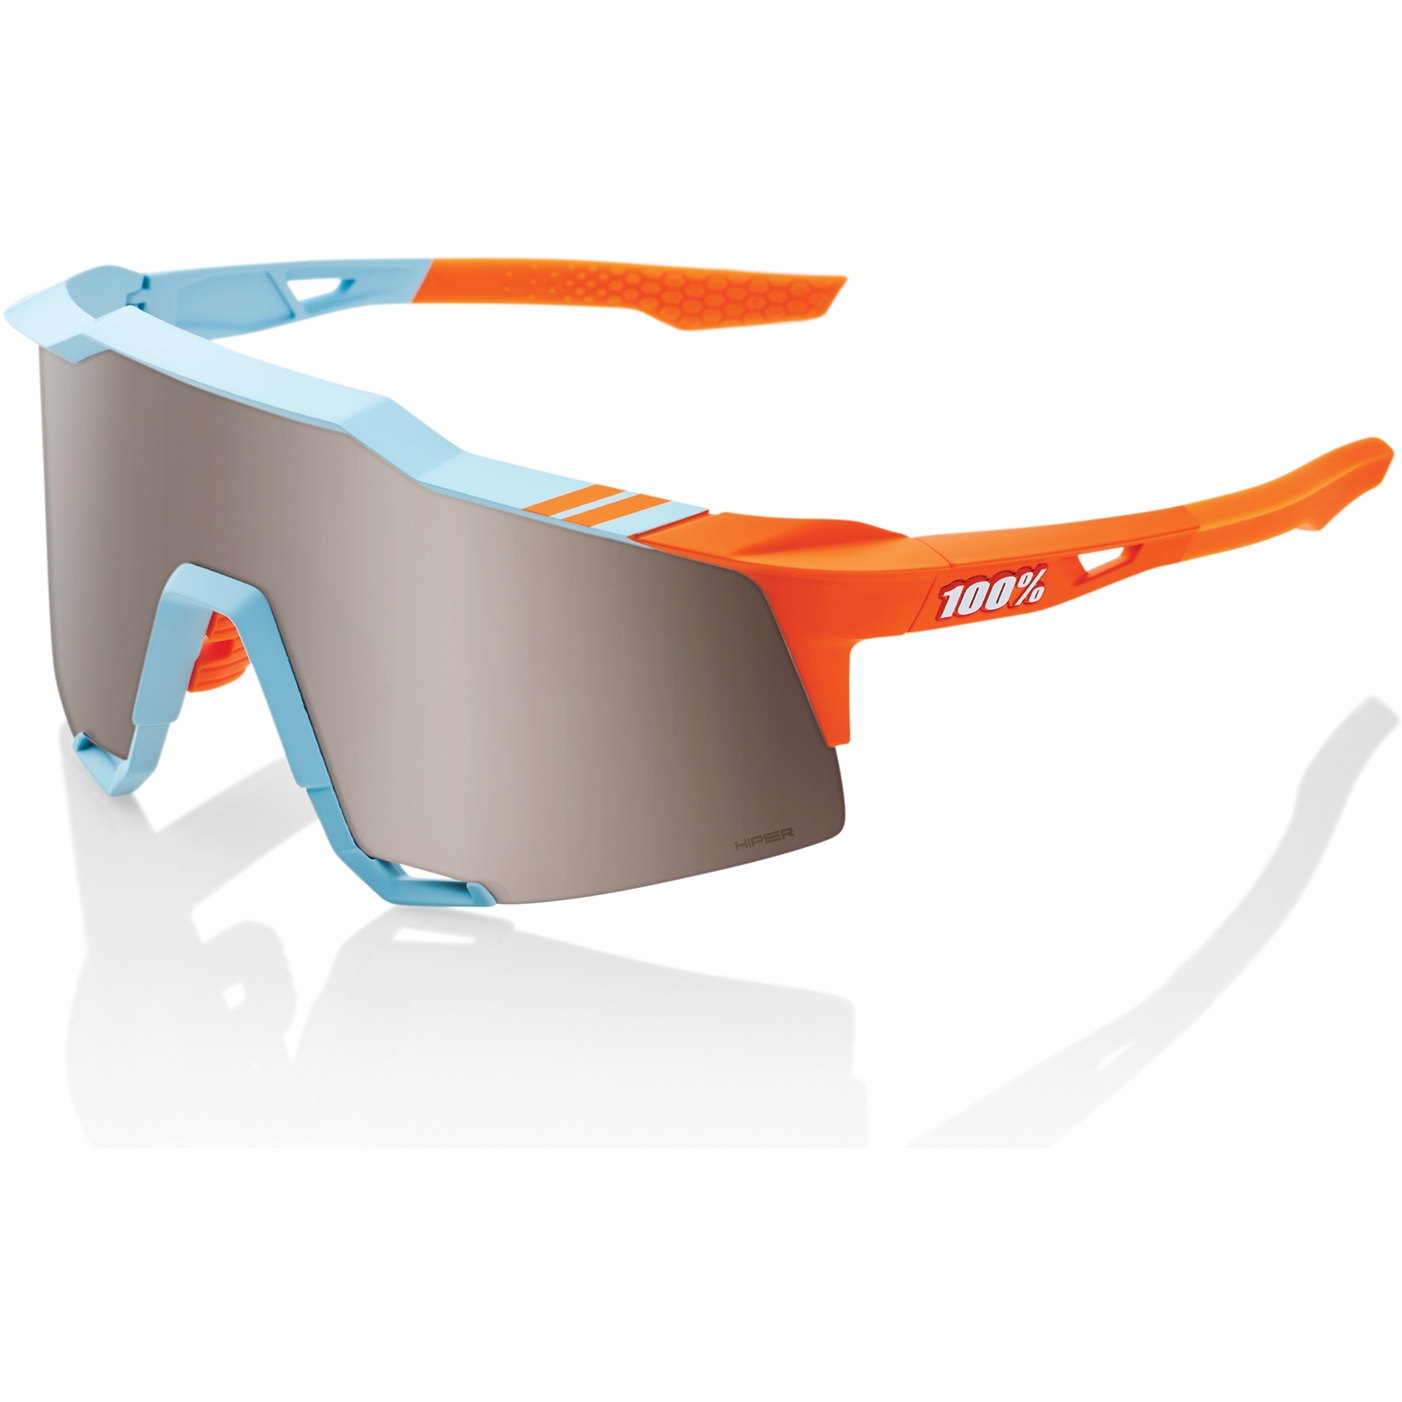 Productfoto van 100% Speedcraft Bril - HiPER Mirror Lens - Soft Tact Two Tone / Silver + Clear